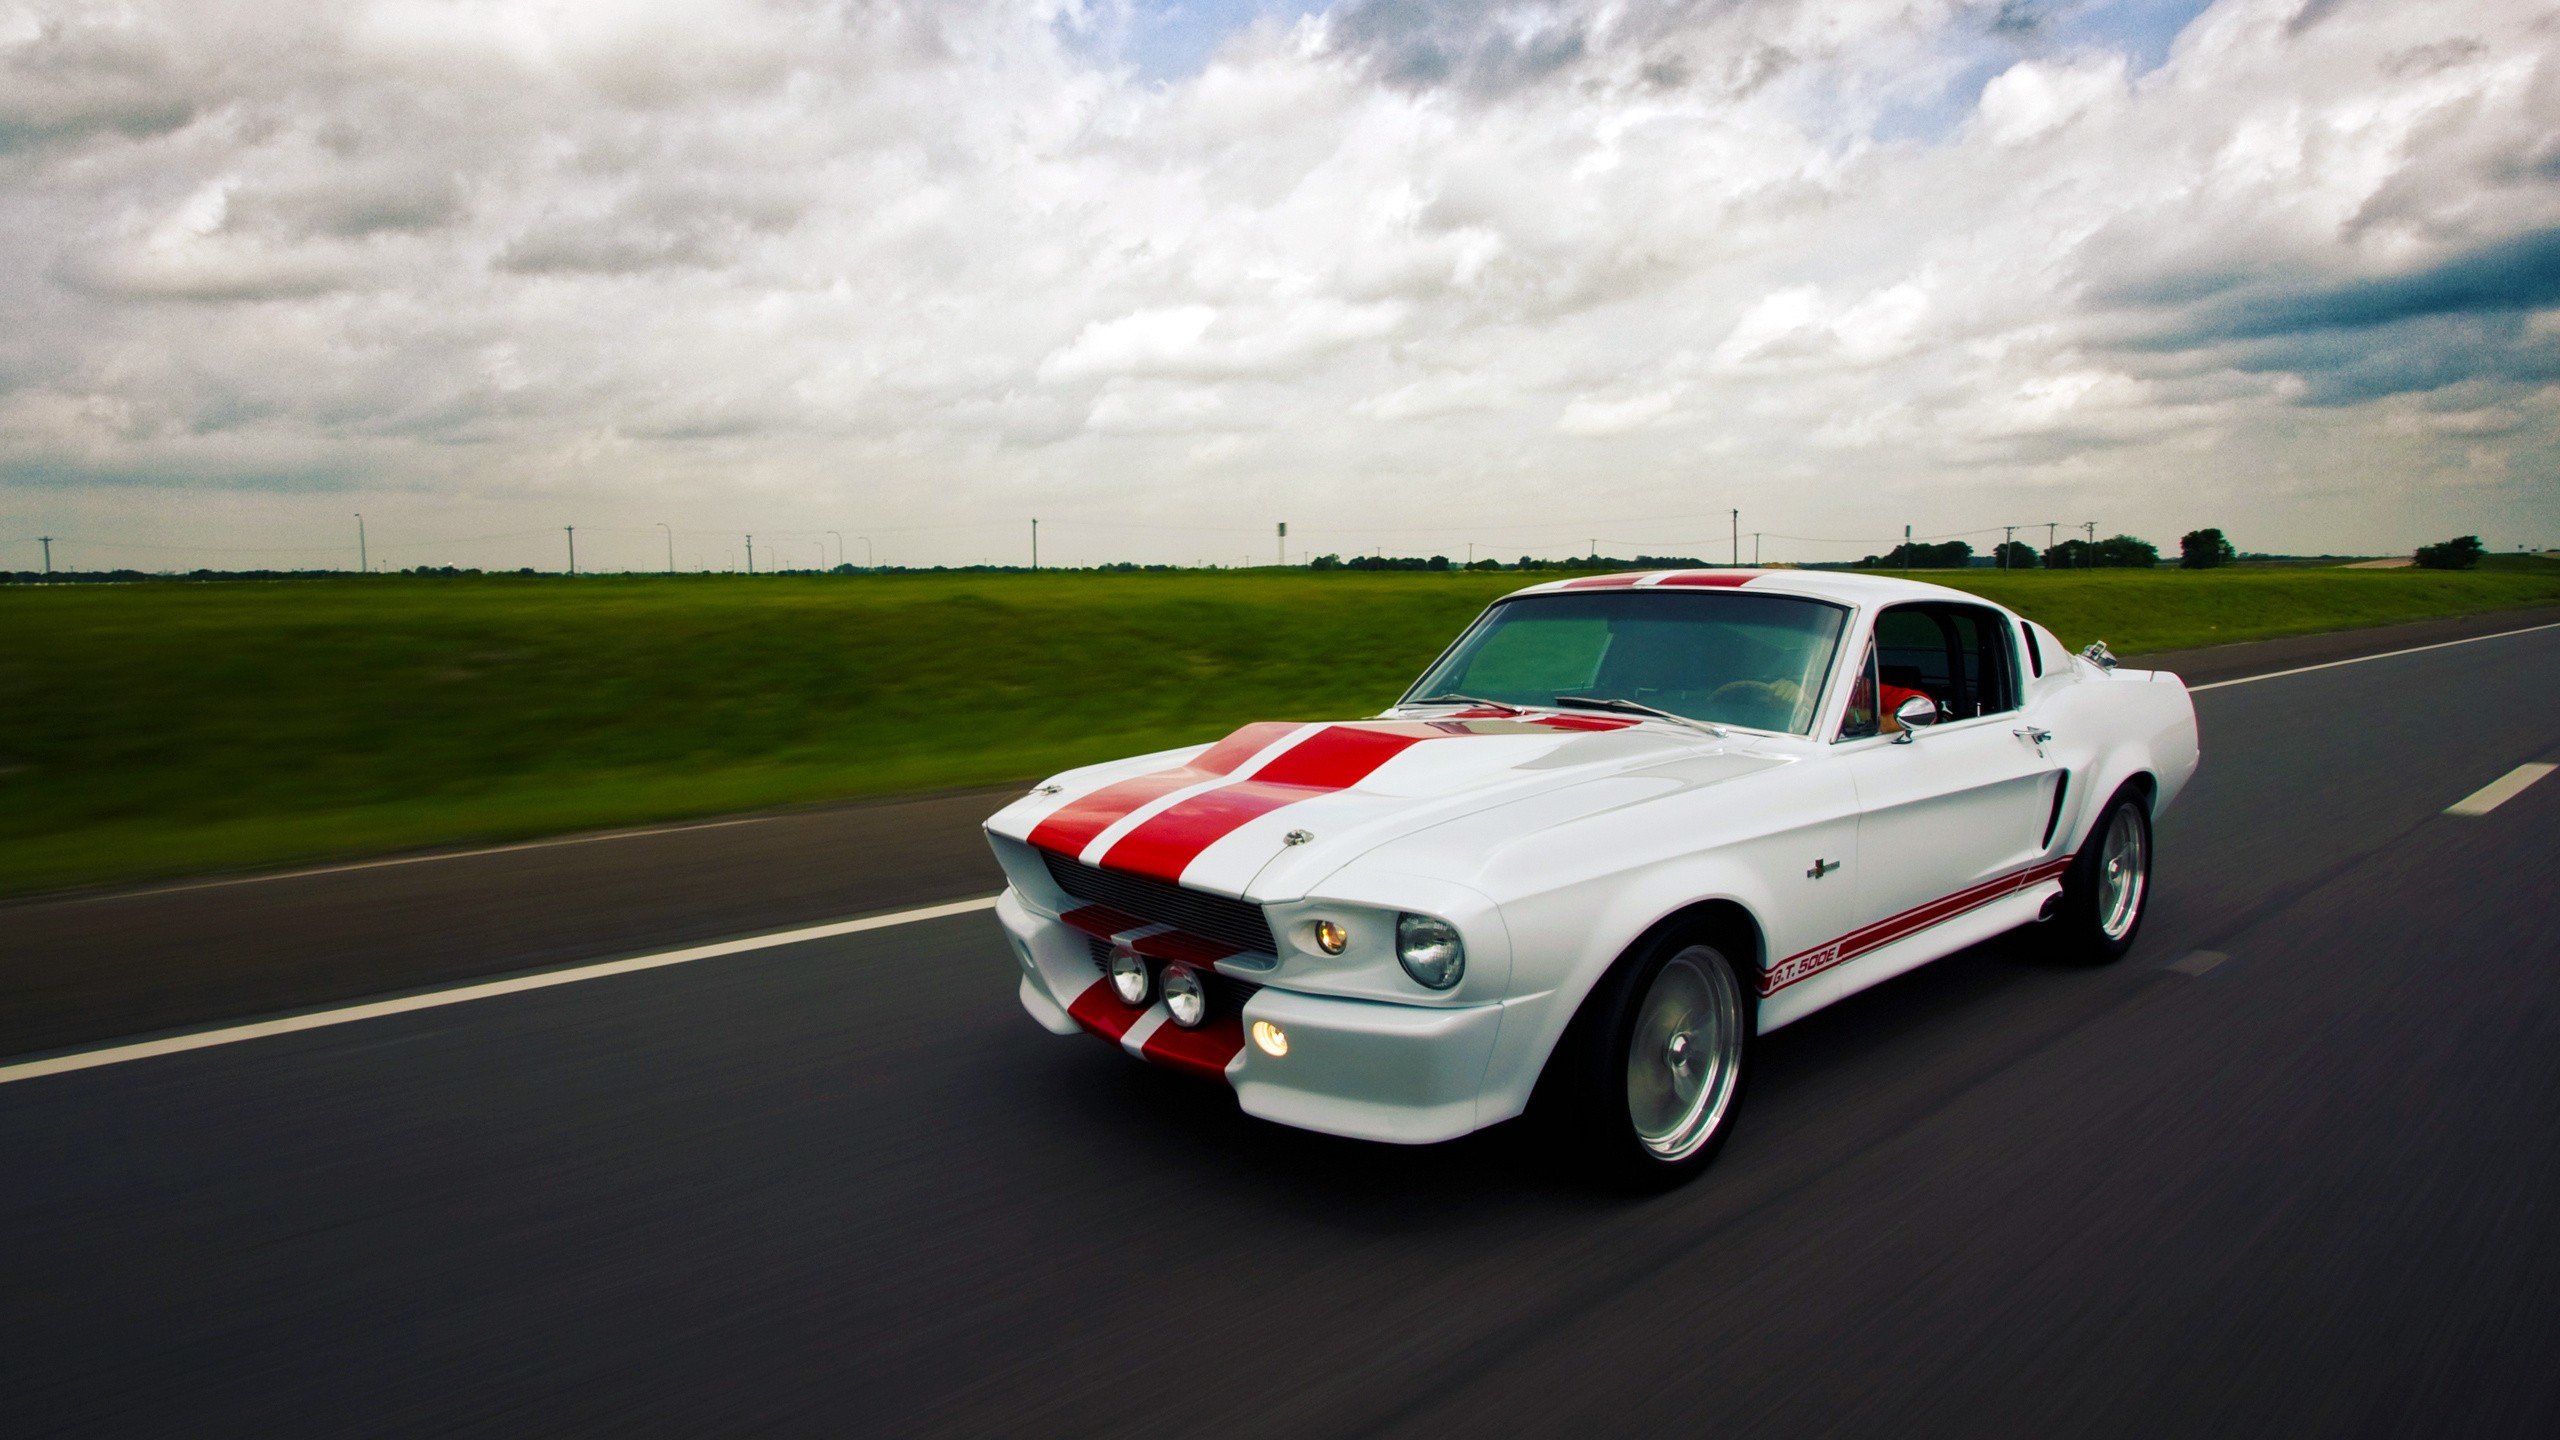 Awesome Ford Mustang free background ID:205728 for hd 2560x1440 desktop